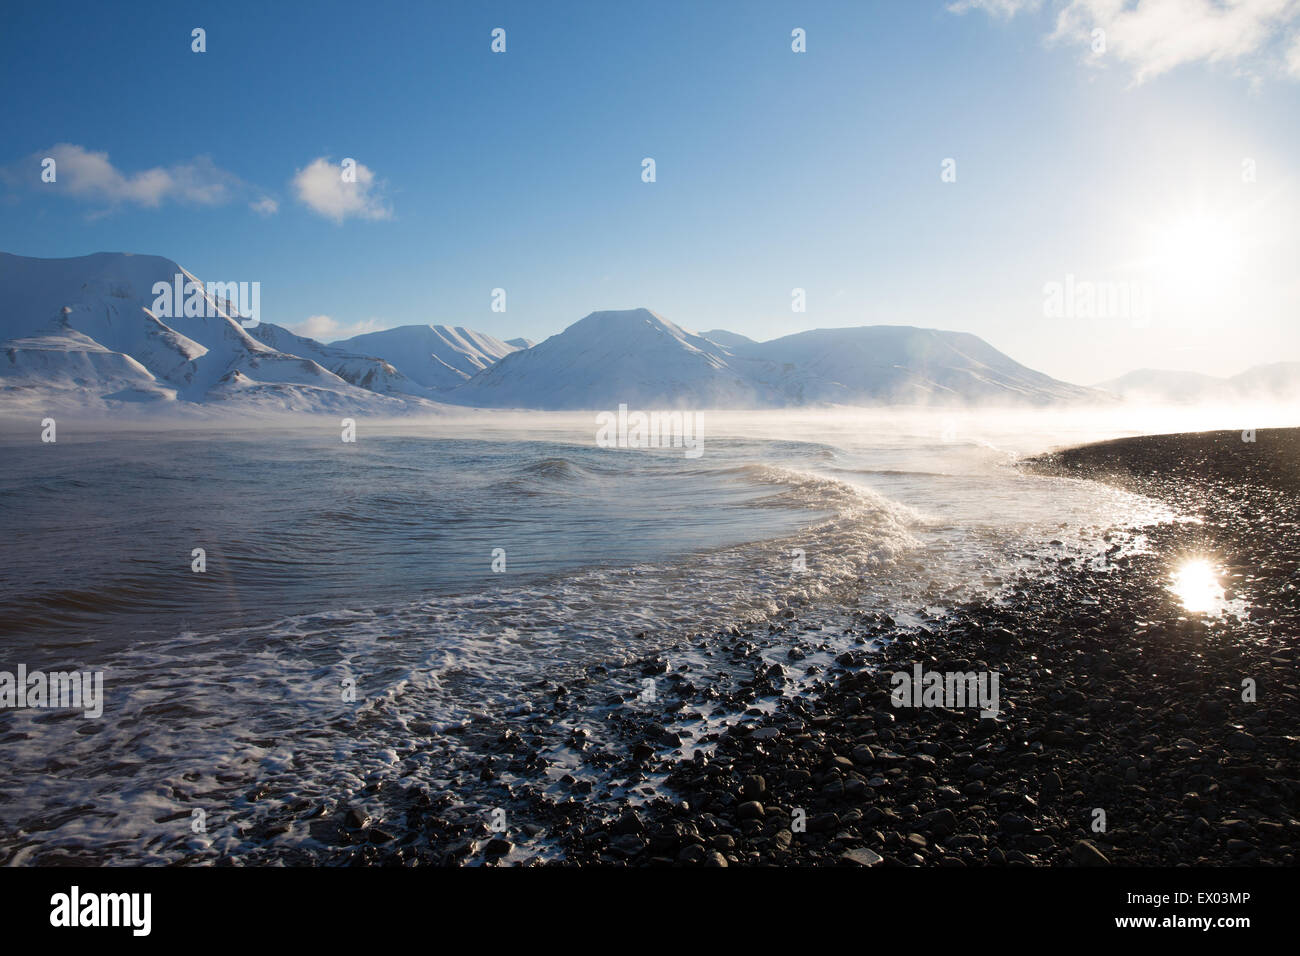 View of sunlit coast and distant mountains, Svalbard, Norway Stock Photo